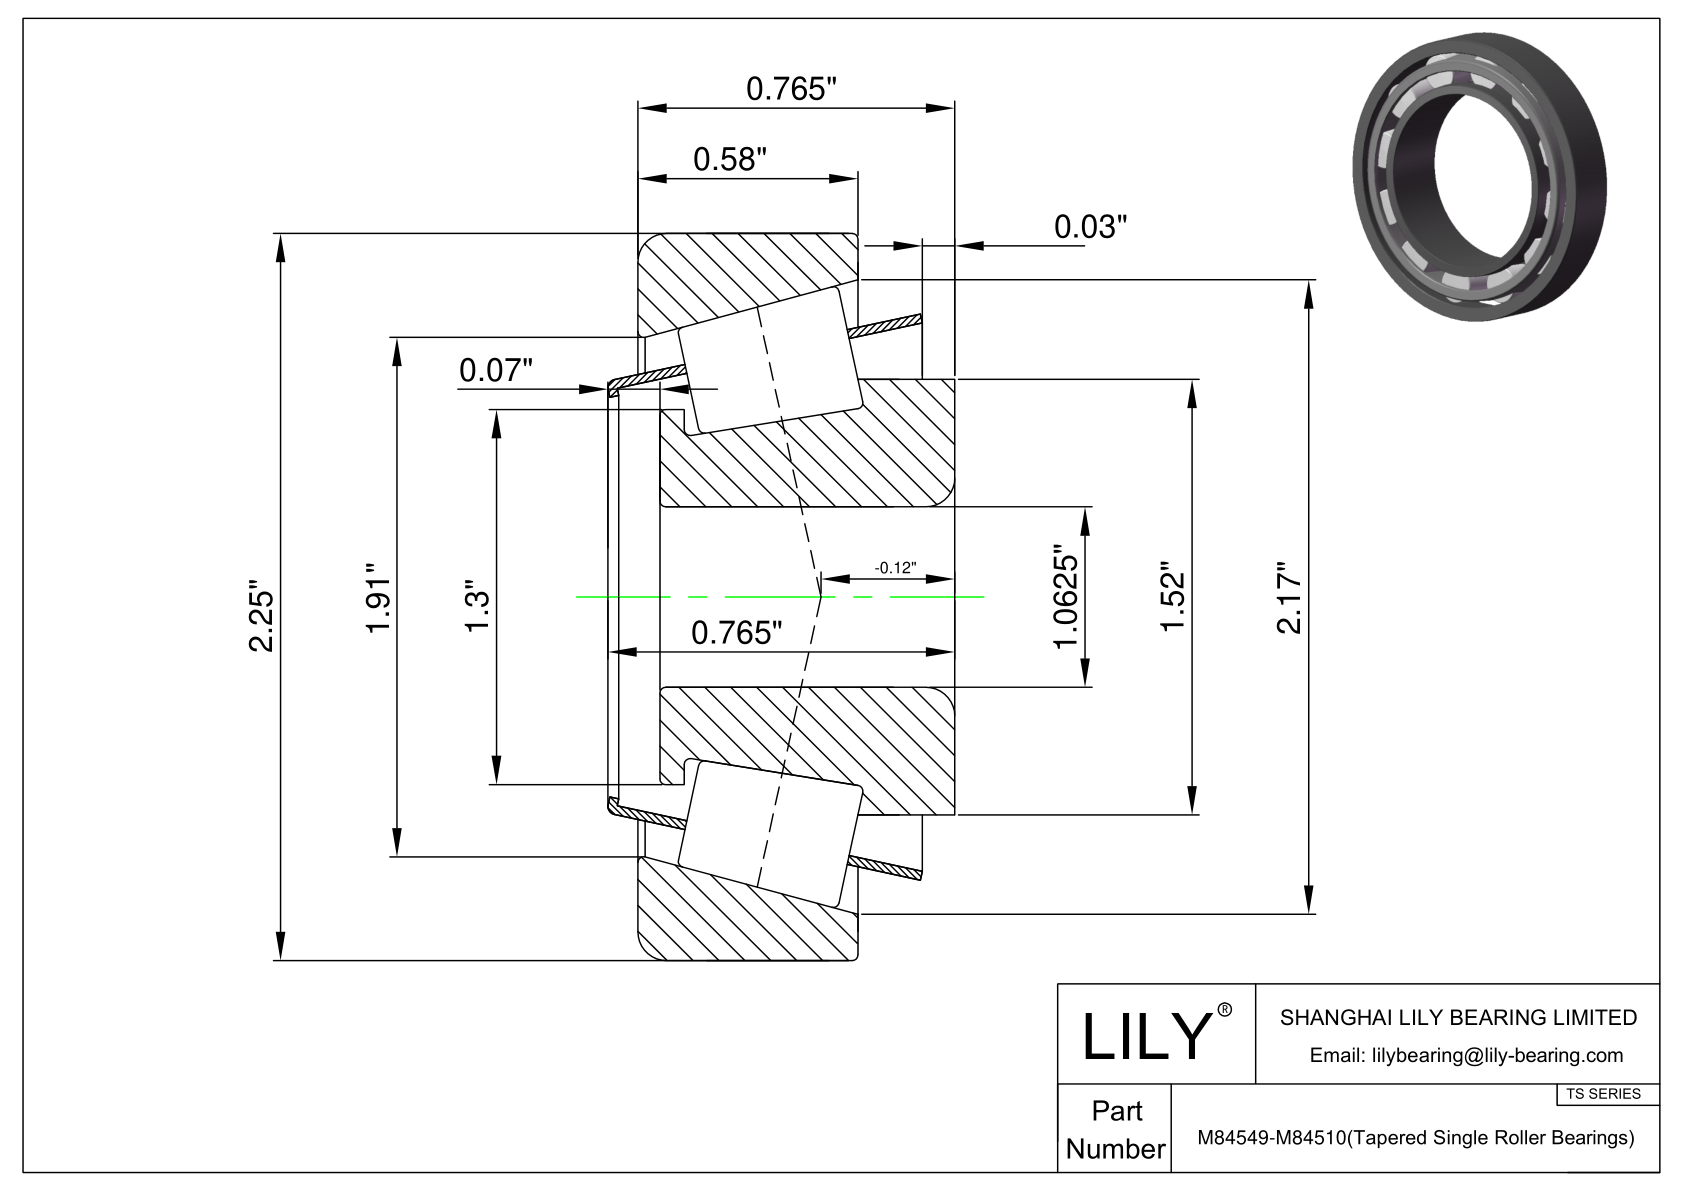 M84549-M84510 TS (Tapered Single Roller Bearings) (Imperial) cad drawing